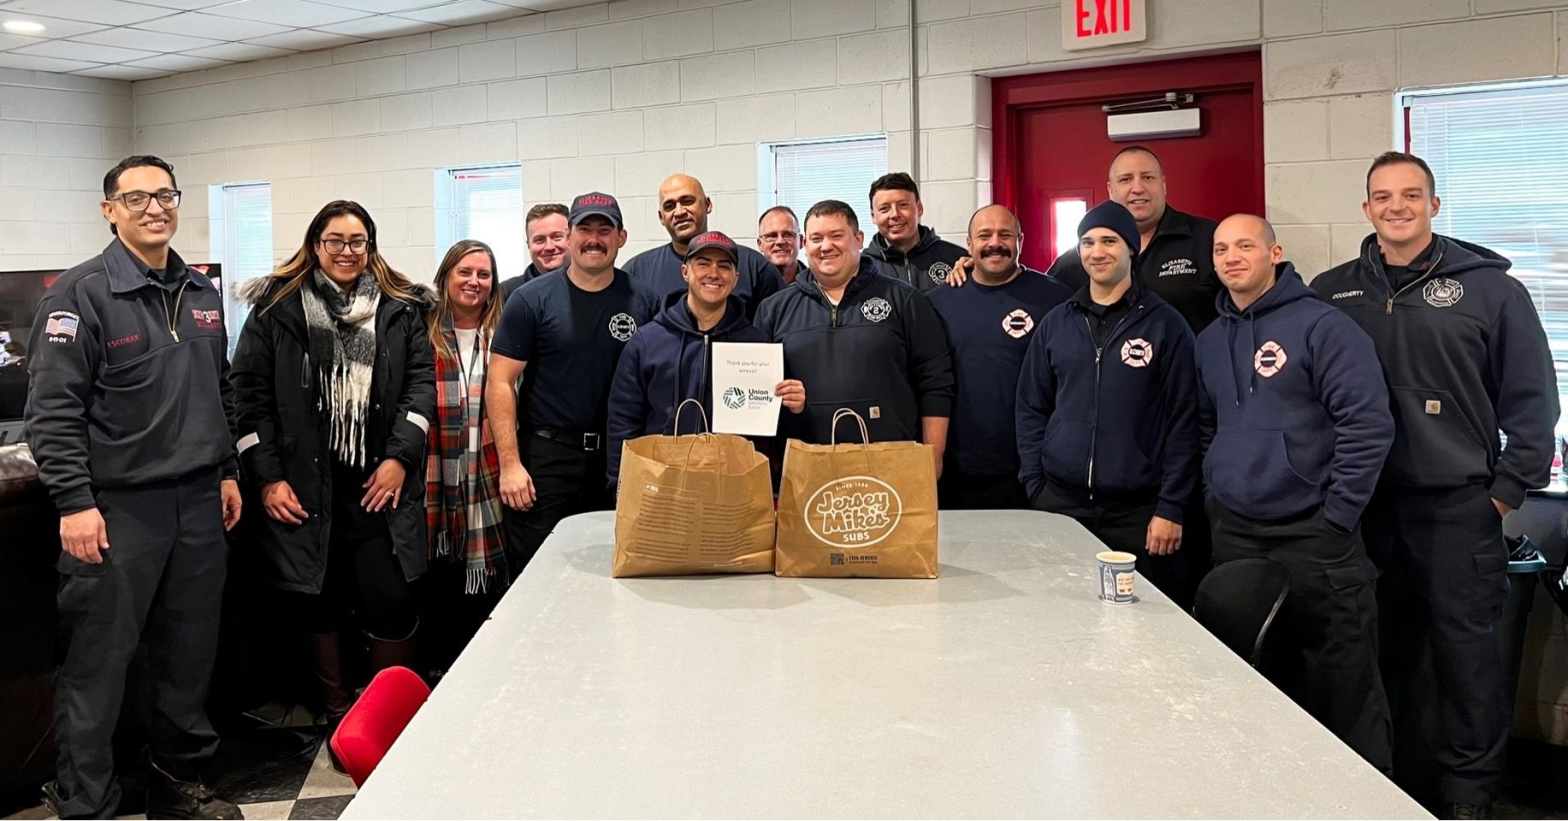 Jersey Mike’s from UCSB Brings More Smiles to Fire Stations